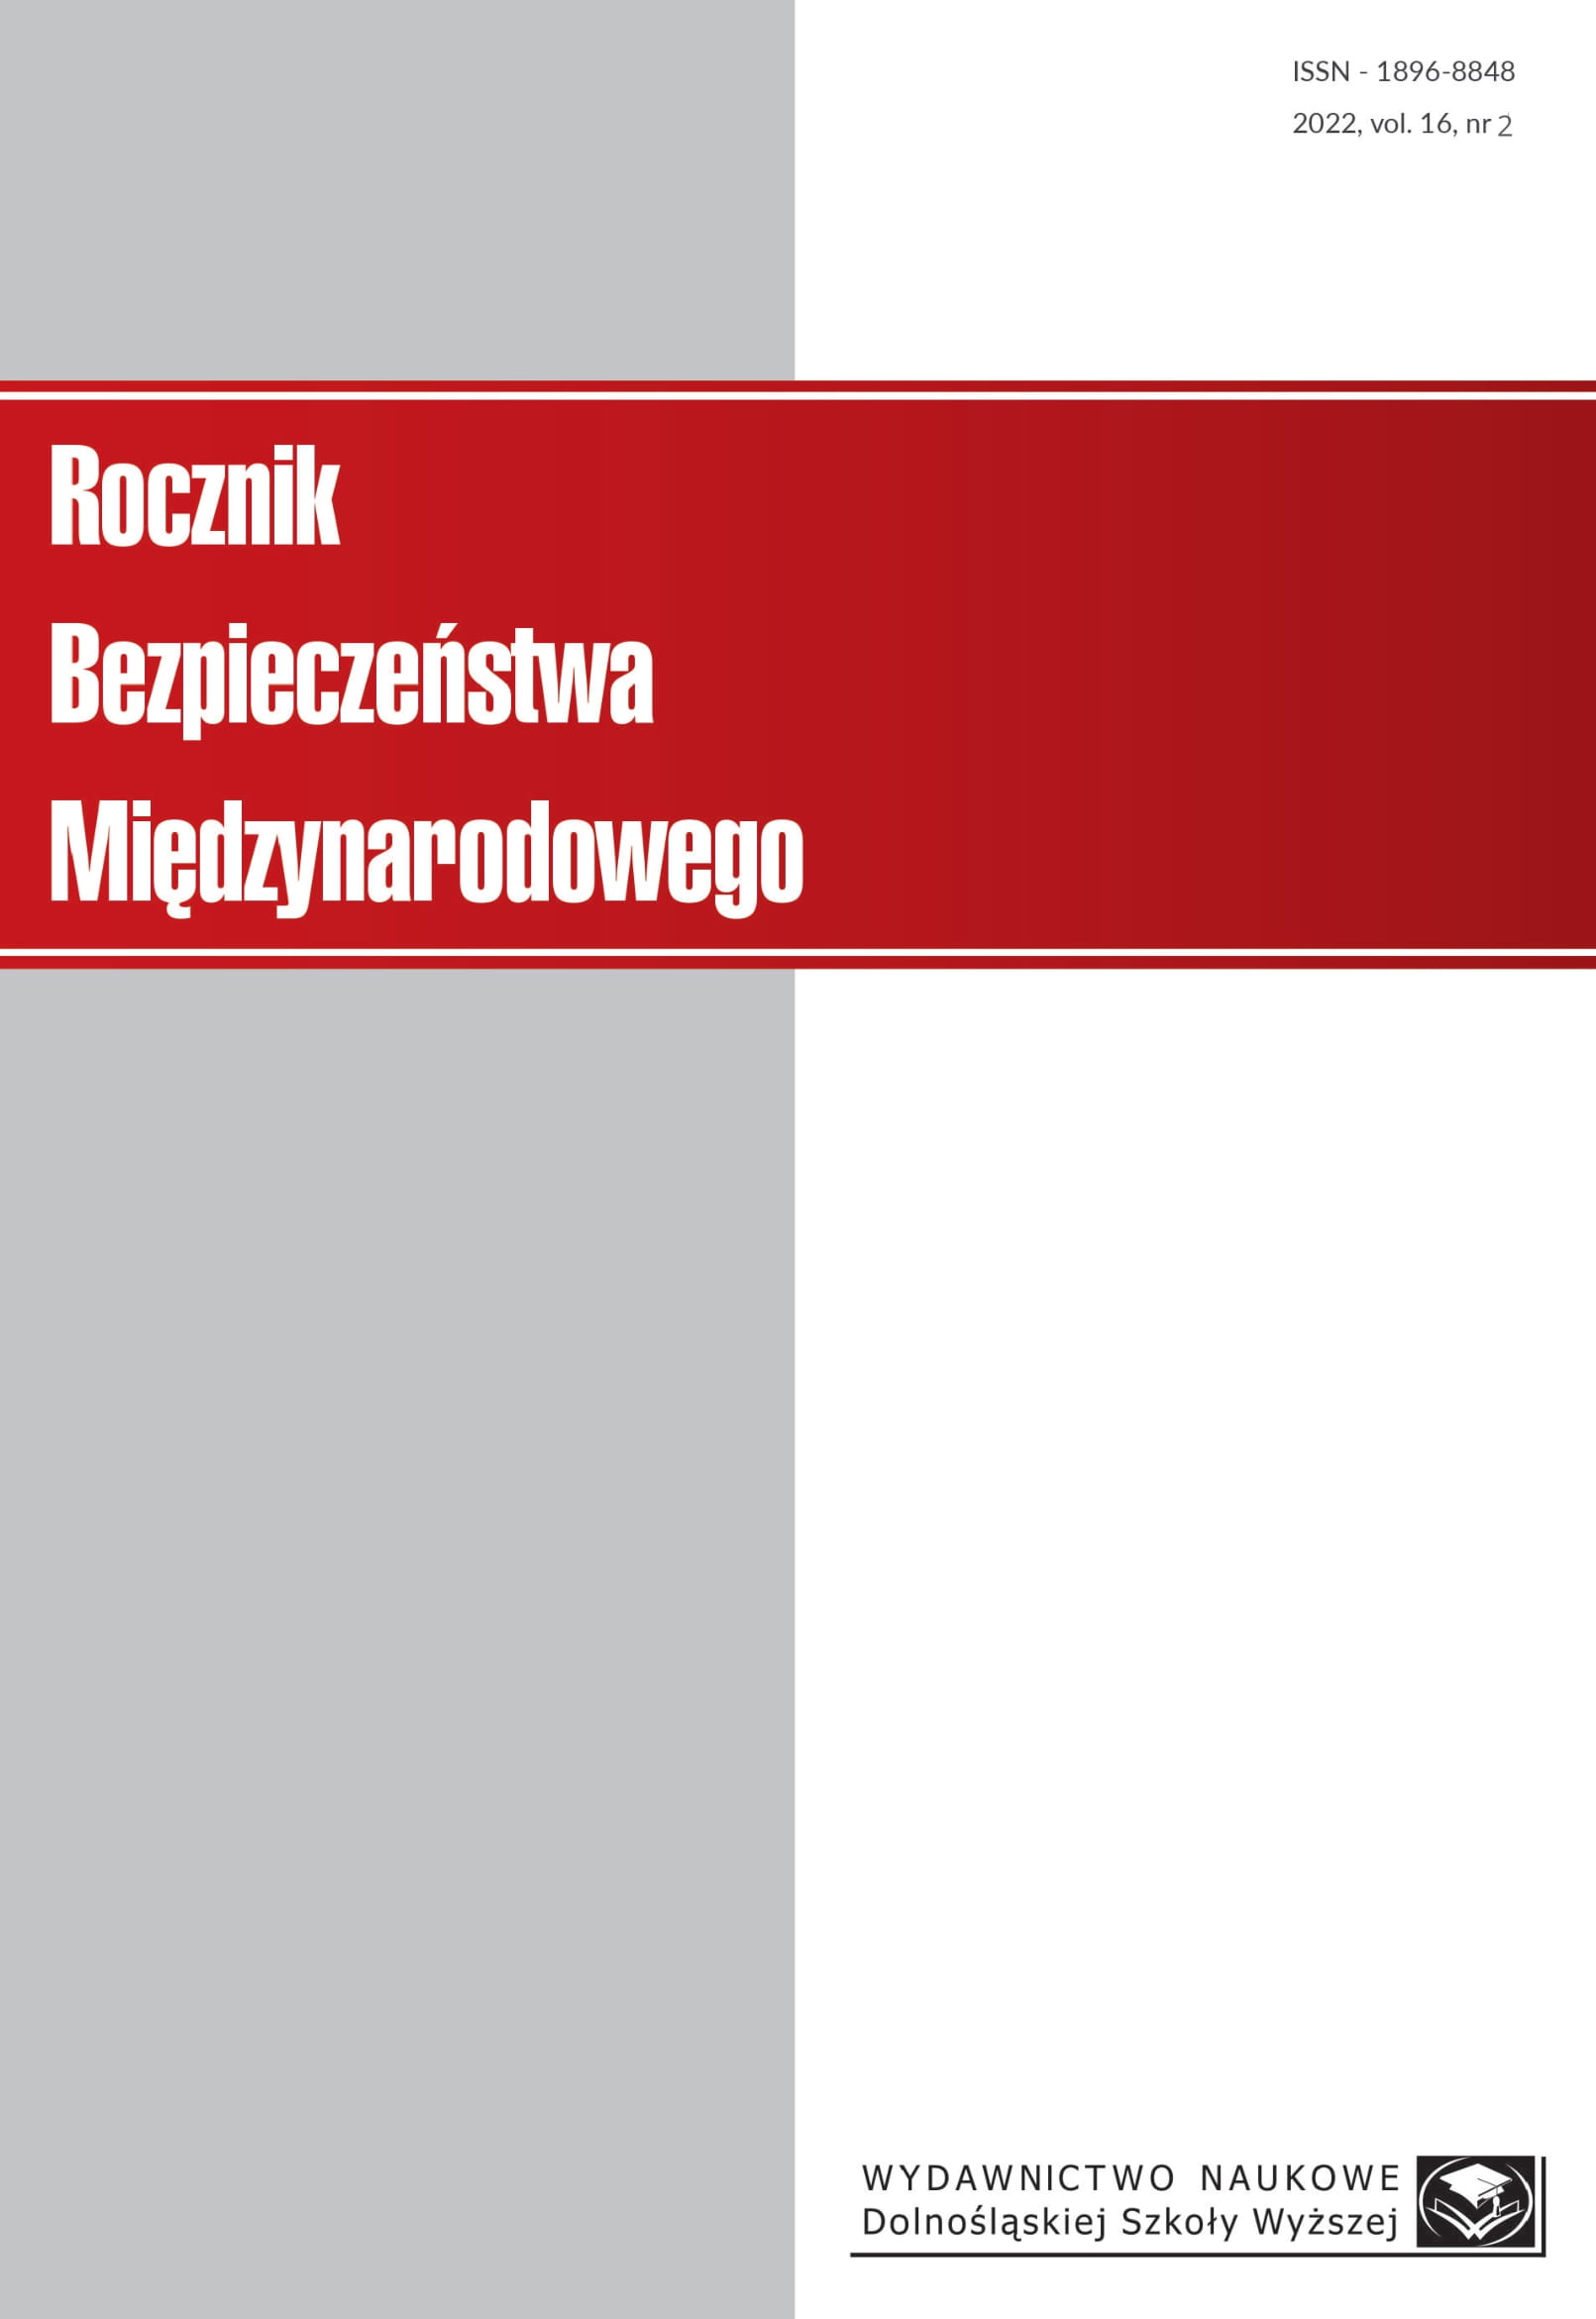 Using of Scanning Devices in Sea Ports of the Republic of Poland on the Example 
of the Functioning of the Maritime Crime Combat Department of the Pomeranian Customs and Tax Office in Gdynia Cover Image